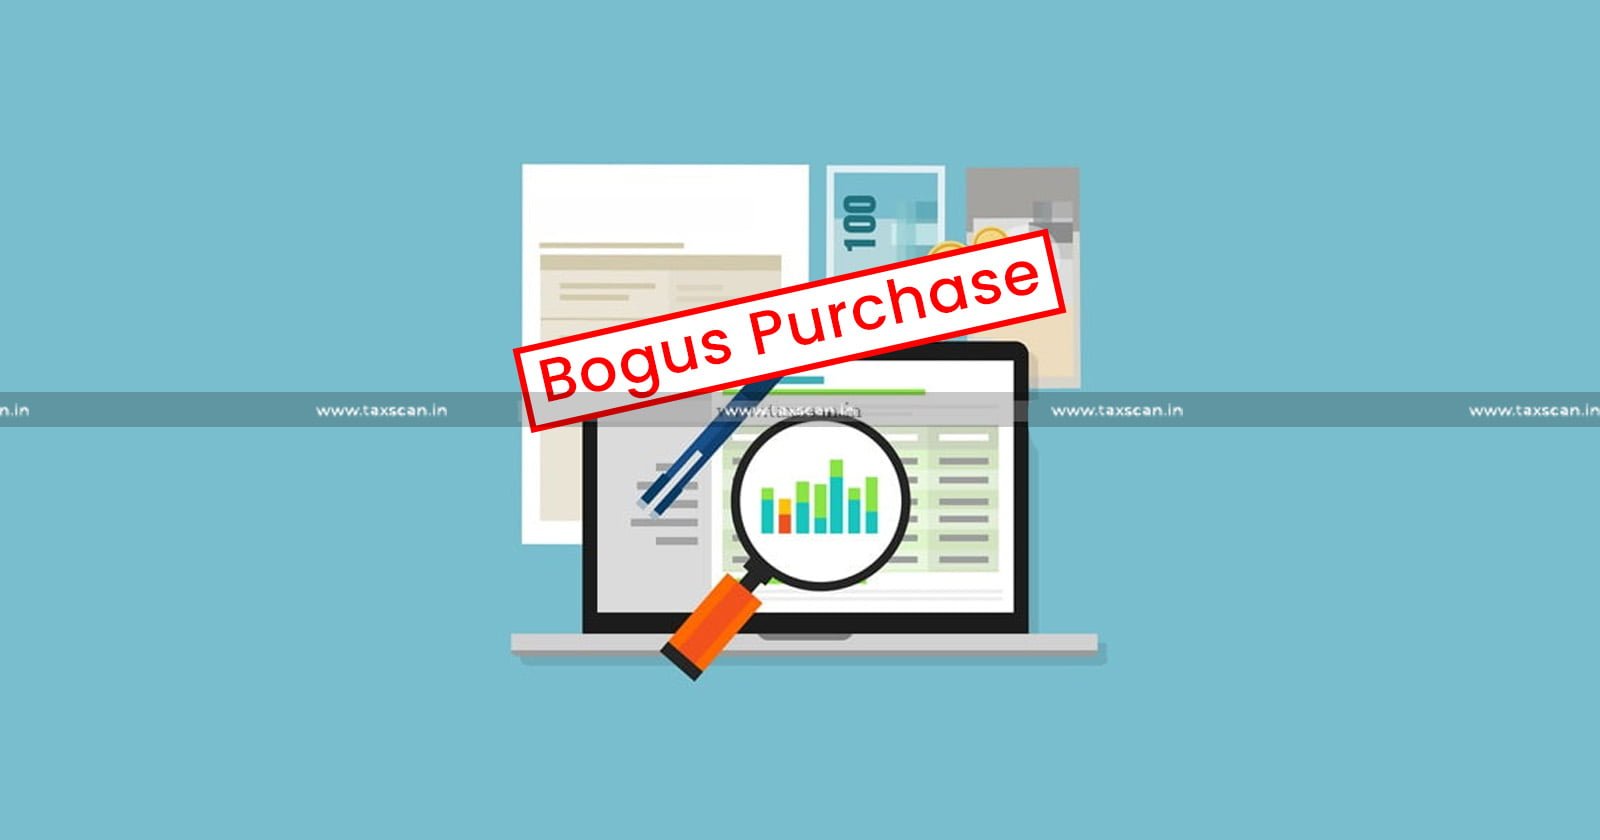 Profit Element of Bogus Purchase - Bogus Purchase - Income Tax Act - Bombay High Court - Assessee - Taxable Income Under Income Tax Act - Taxscan